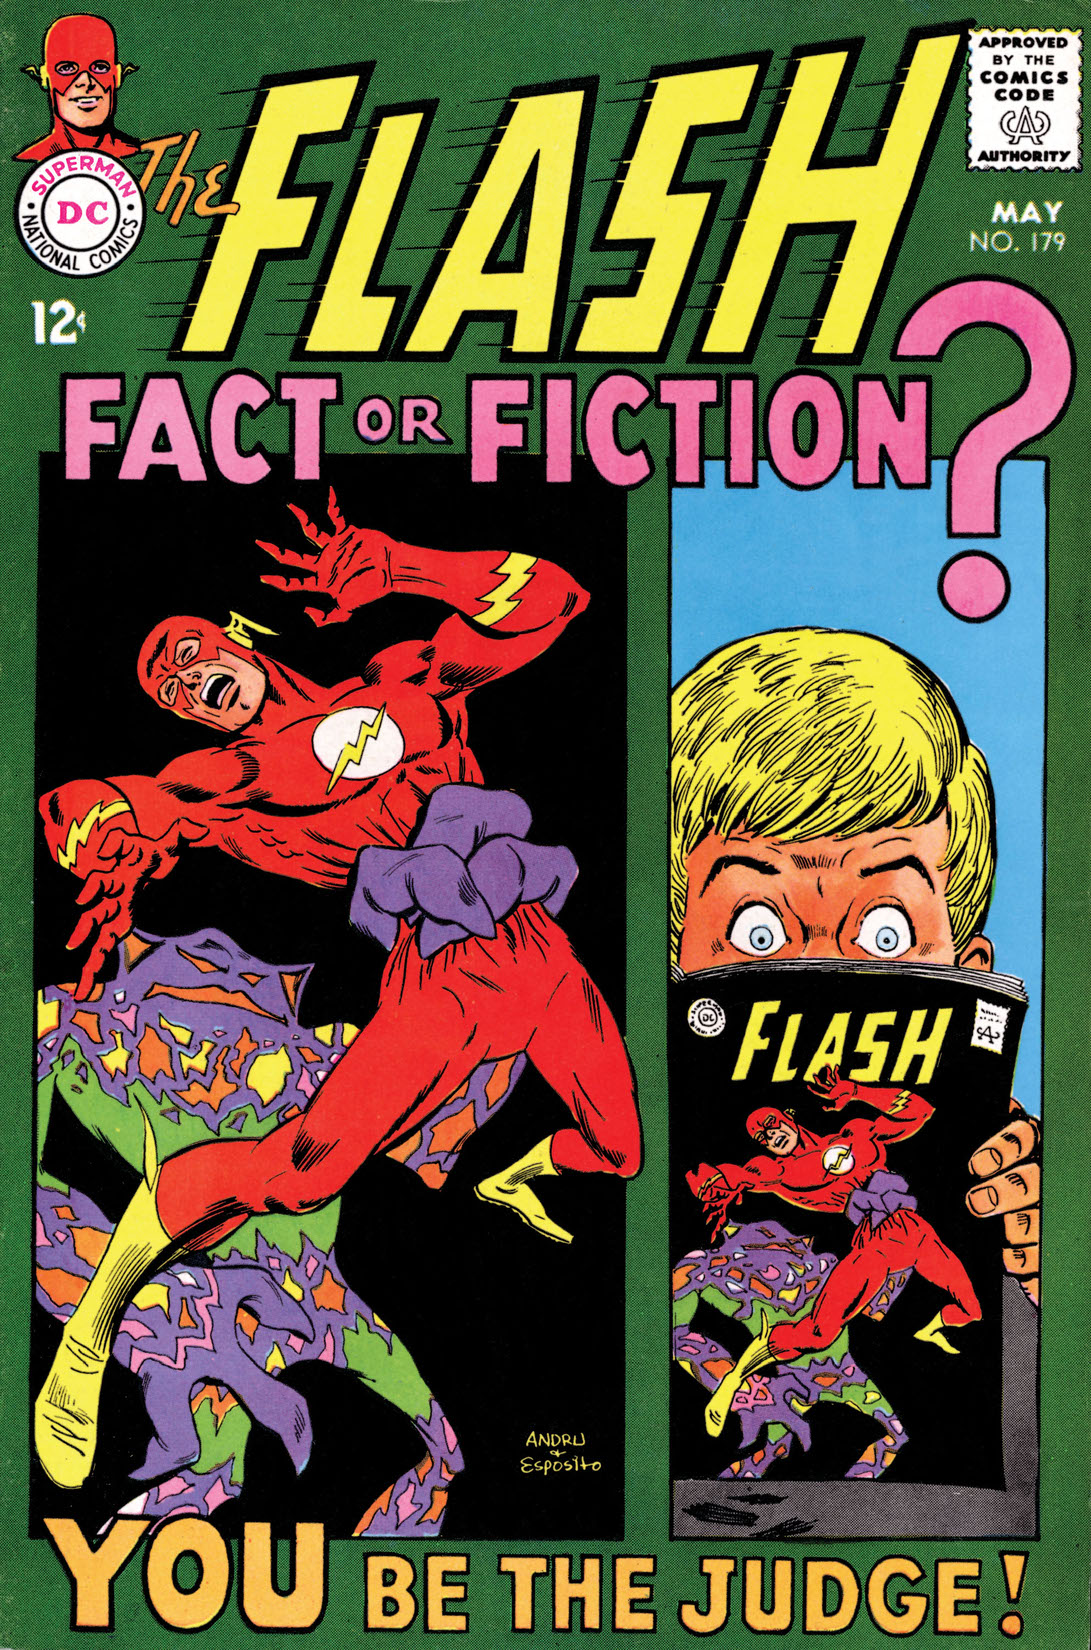 The Flash (1959-) #179 preview images